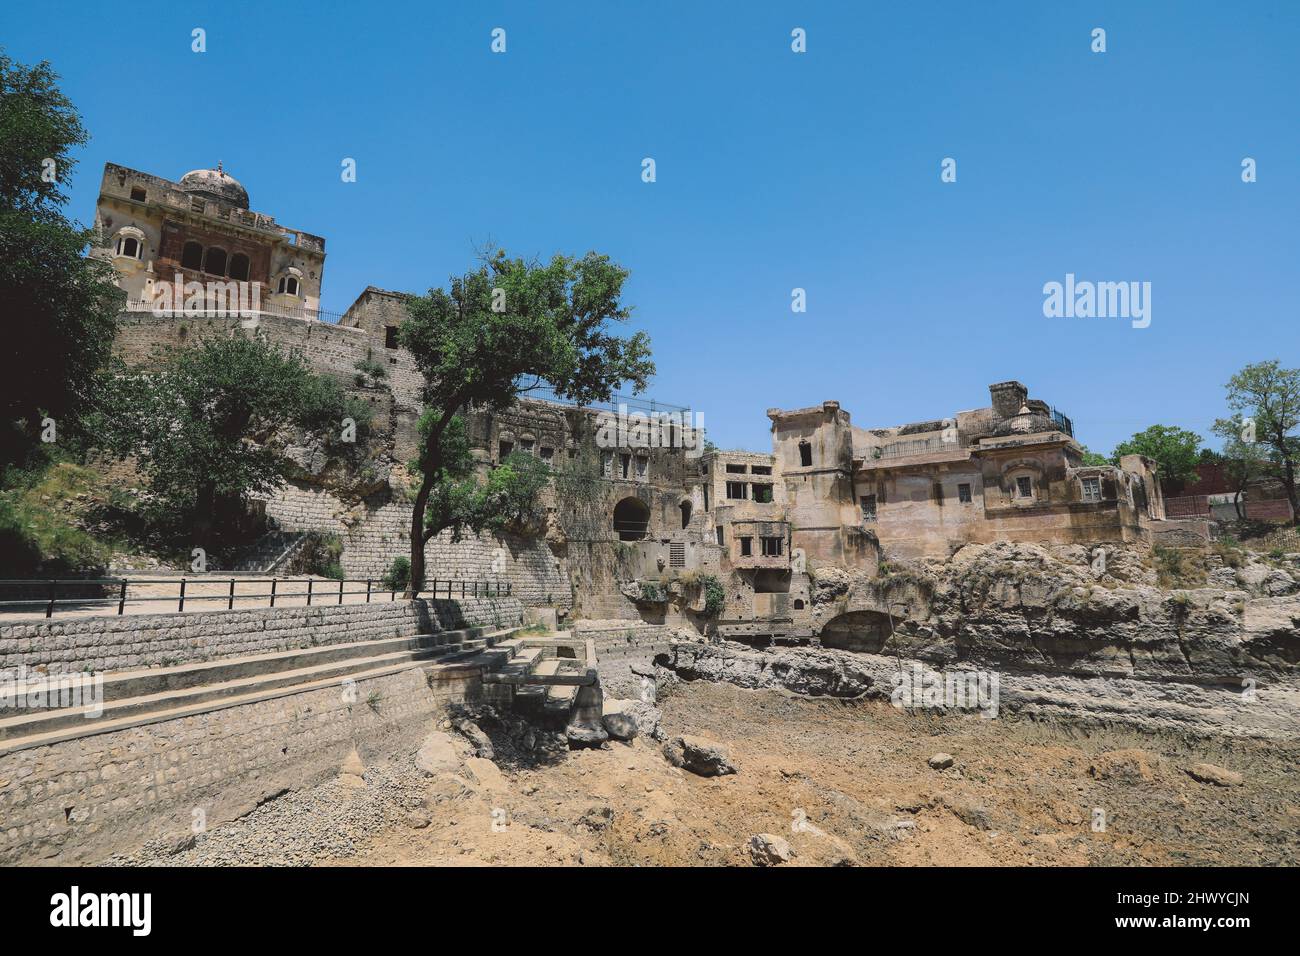 Panoramic View to the Ruins of the Shri Katas Raj Temples, also known as Qila Katas, complex of several Hindu temples in Punjab province, Pakistan Stock Photo